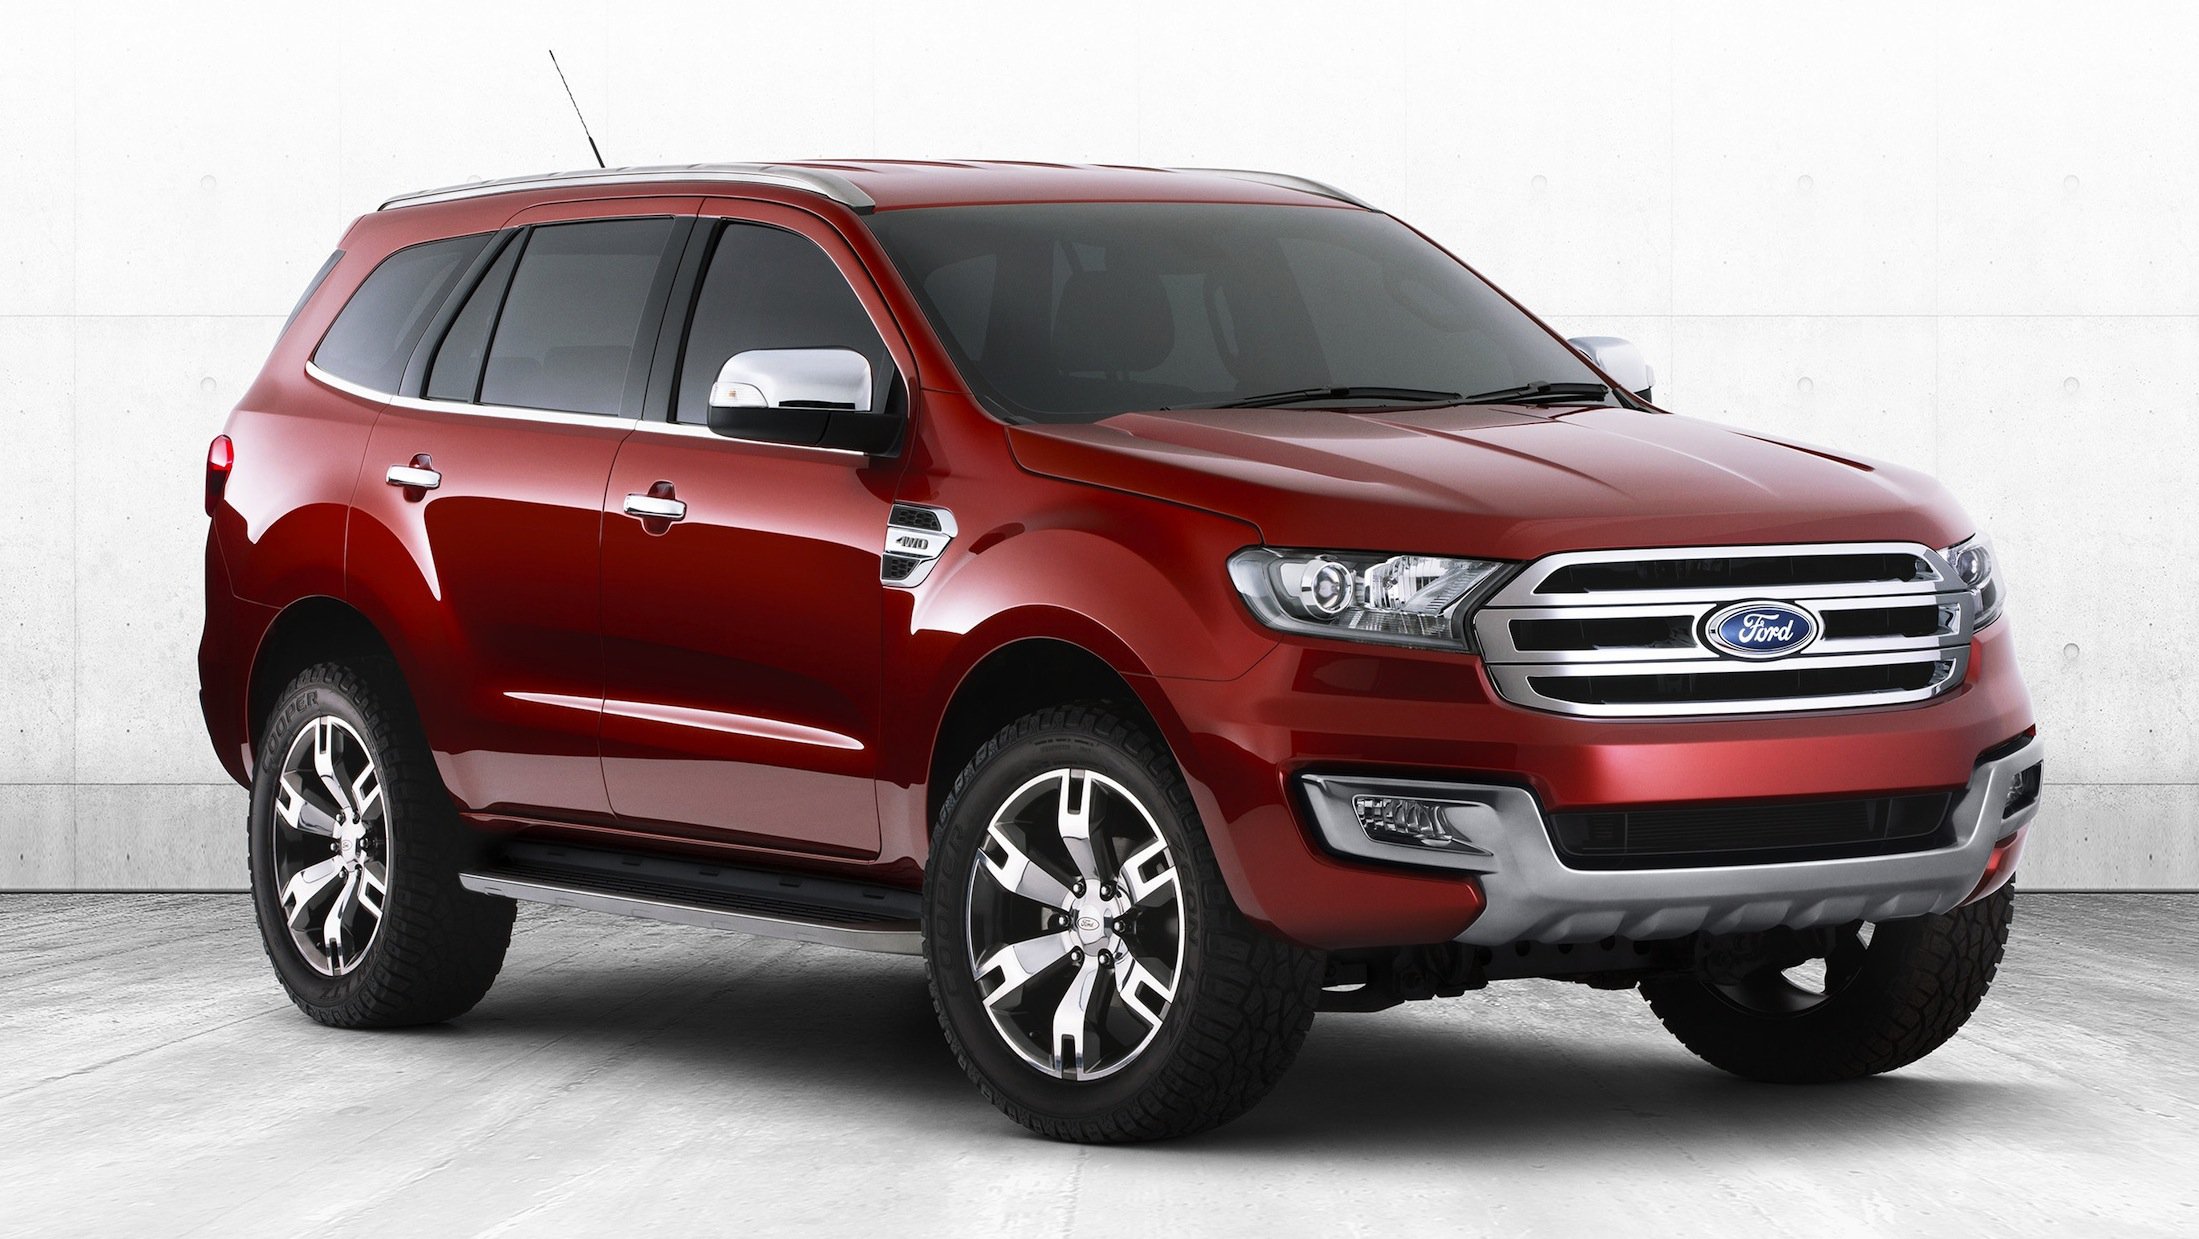 HQ Ford Everest Wallpapers | File 366.48Kb